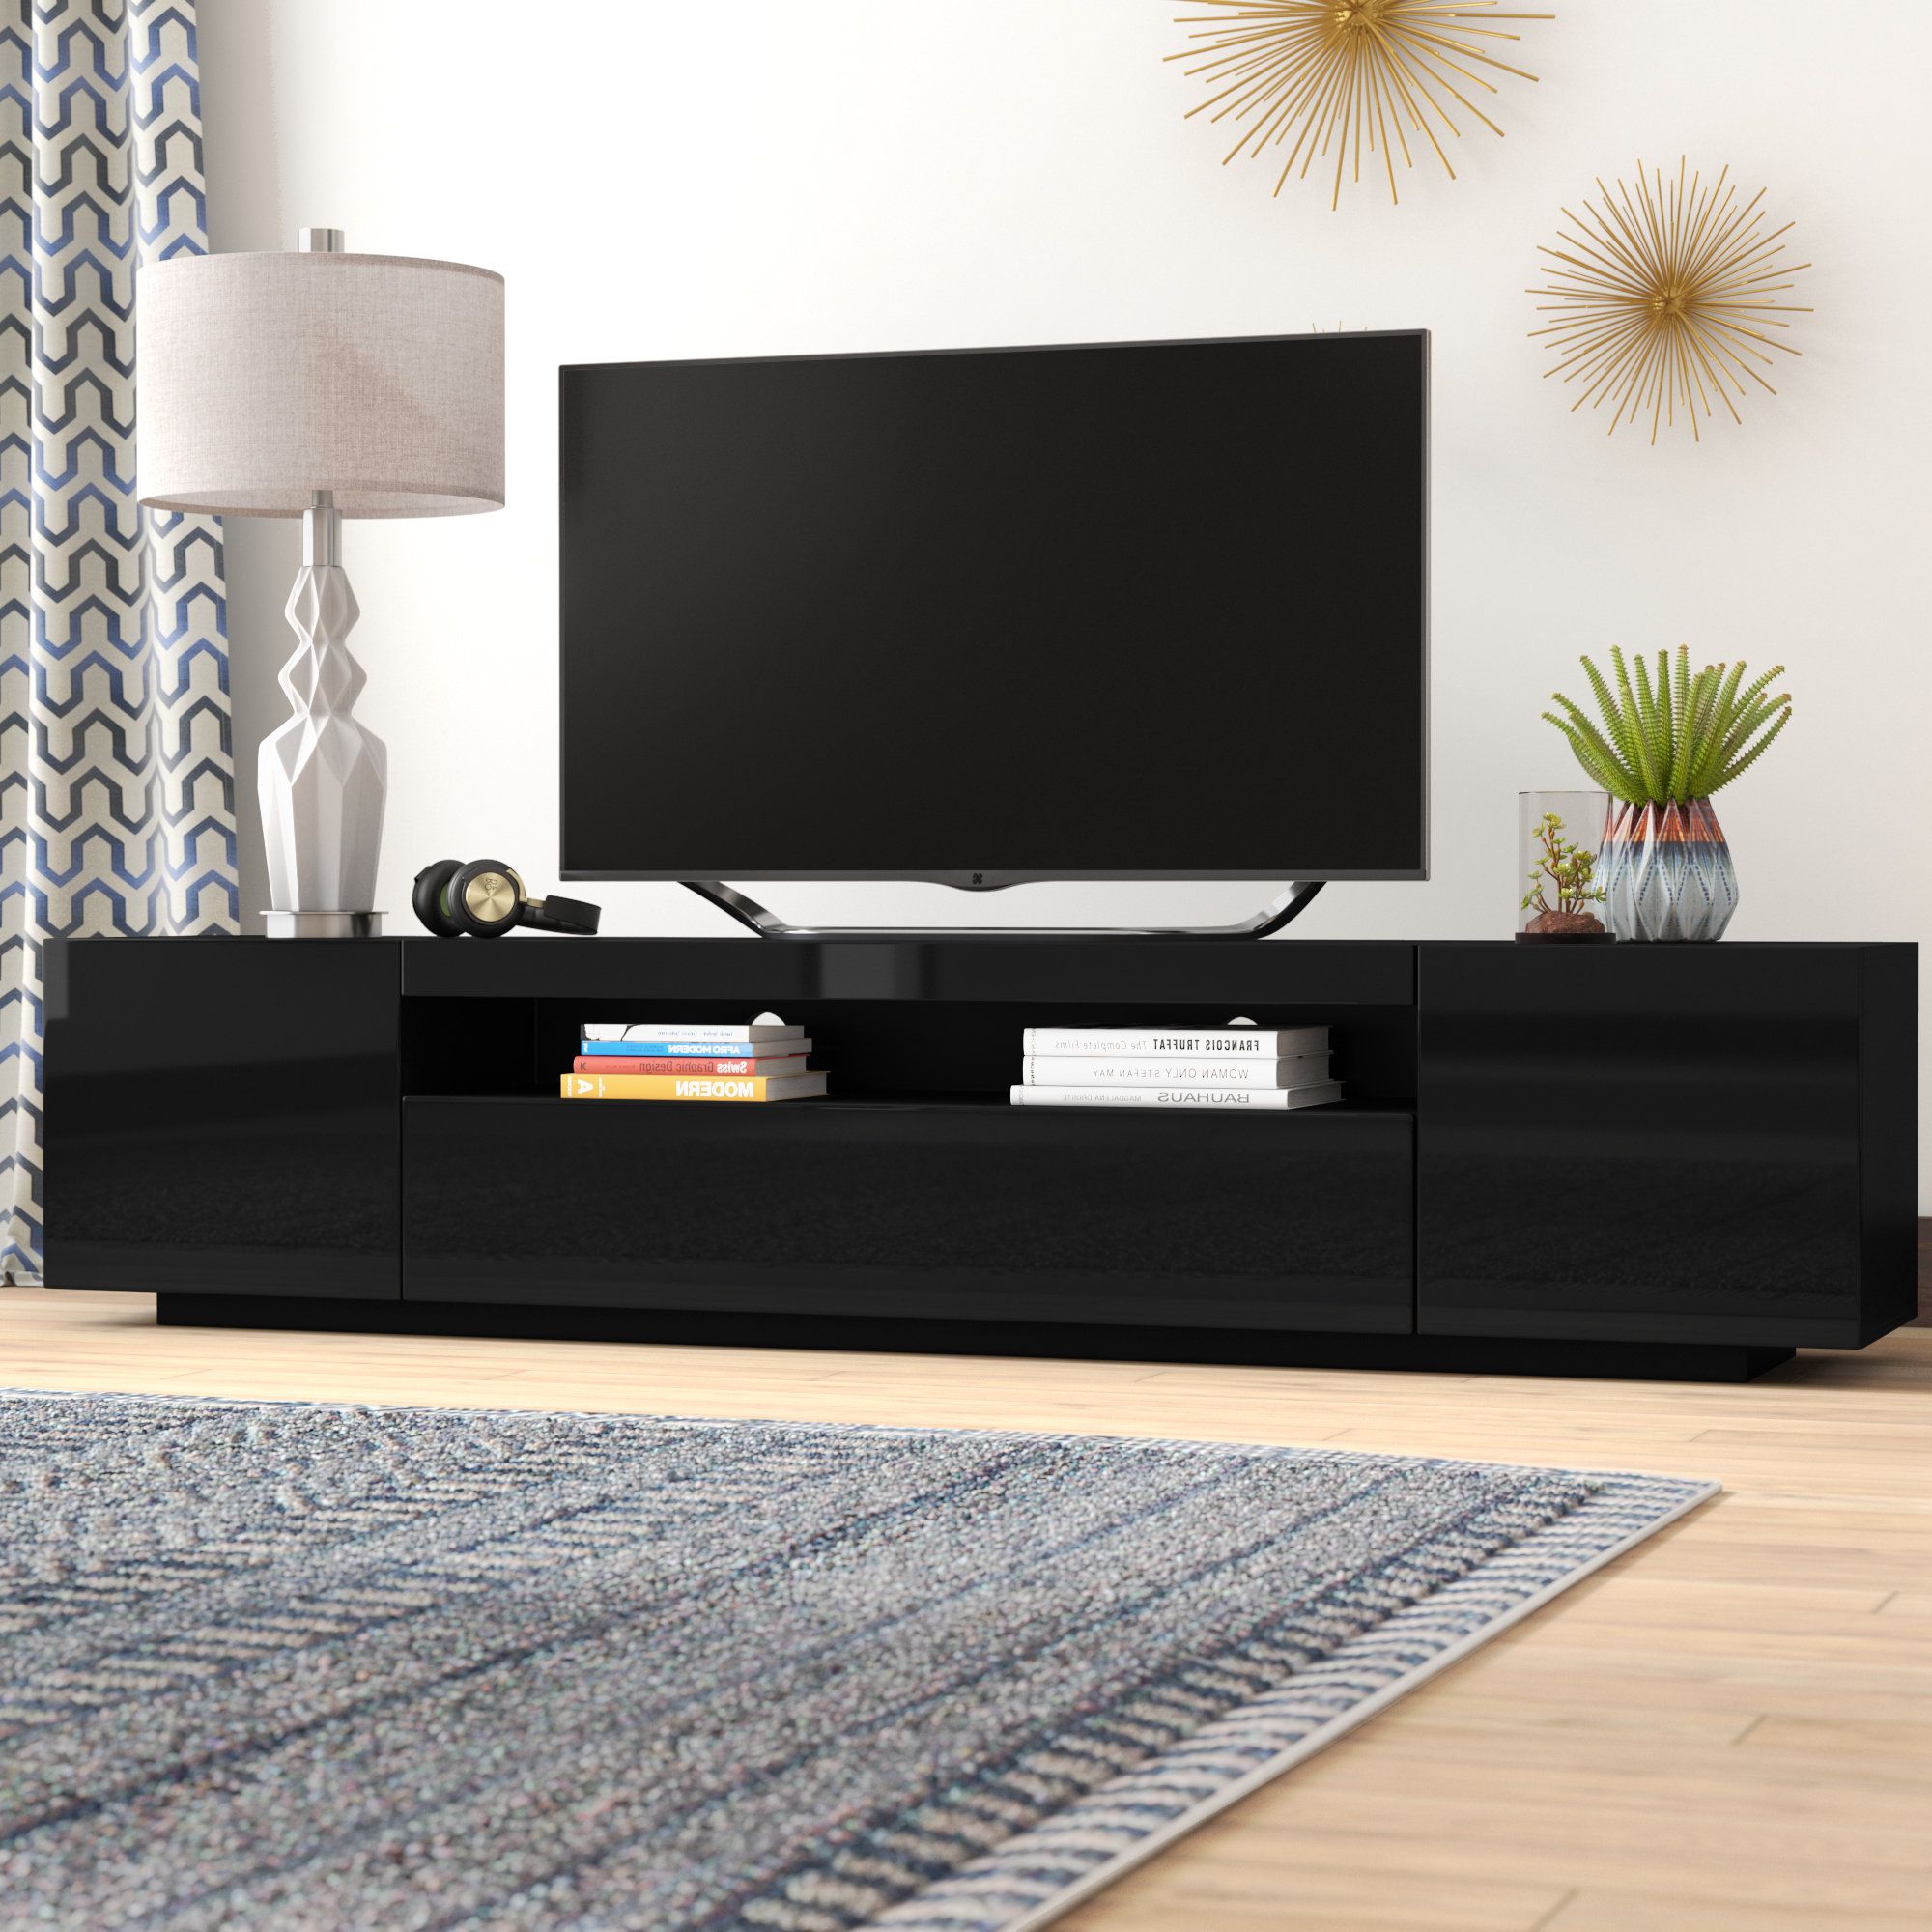 Wayfair Intended For Black Gloss Tv Benches (View 16 of 20)